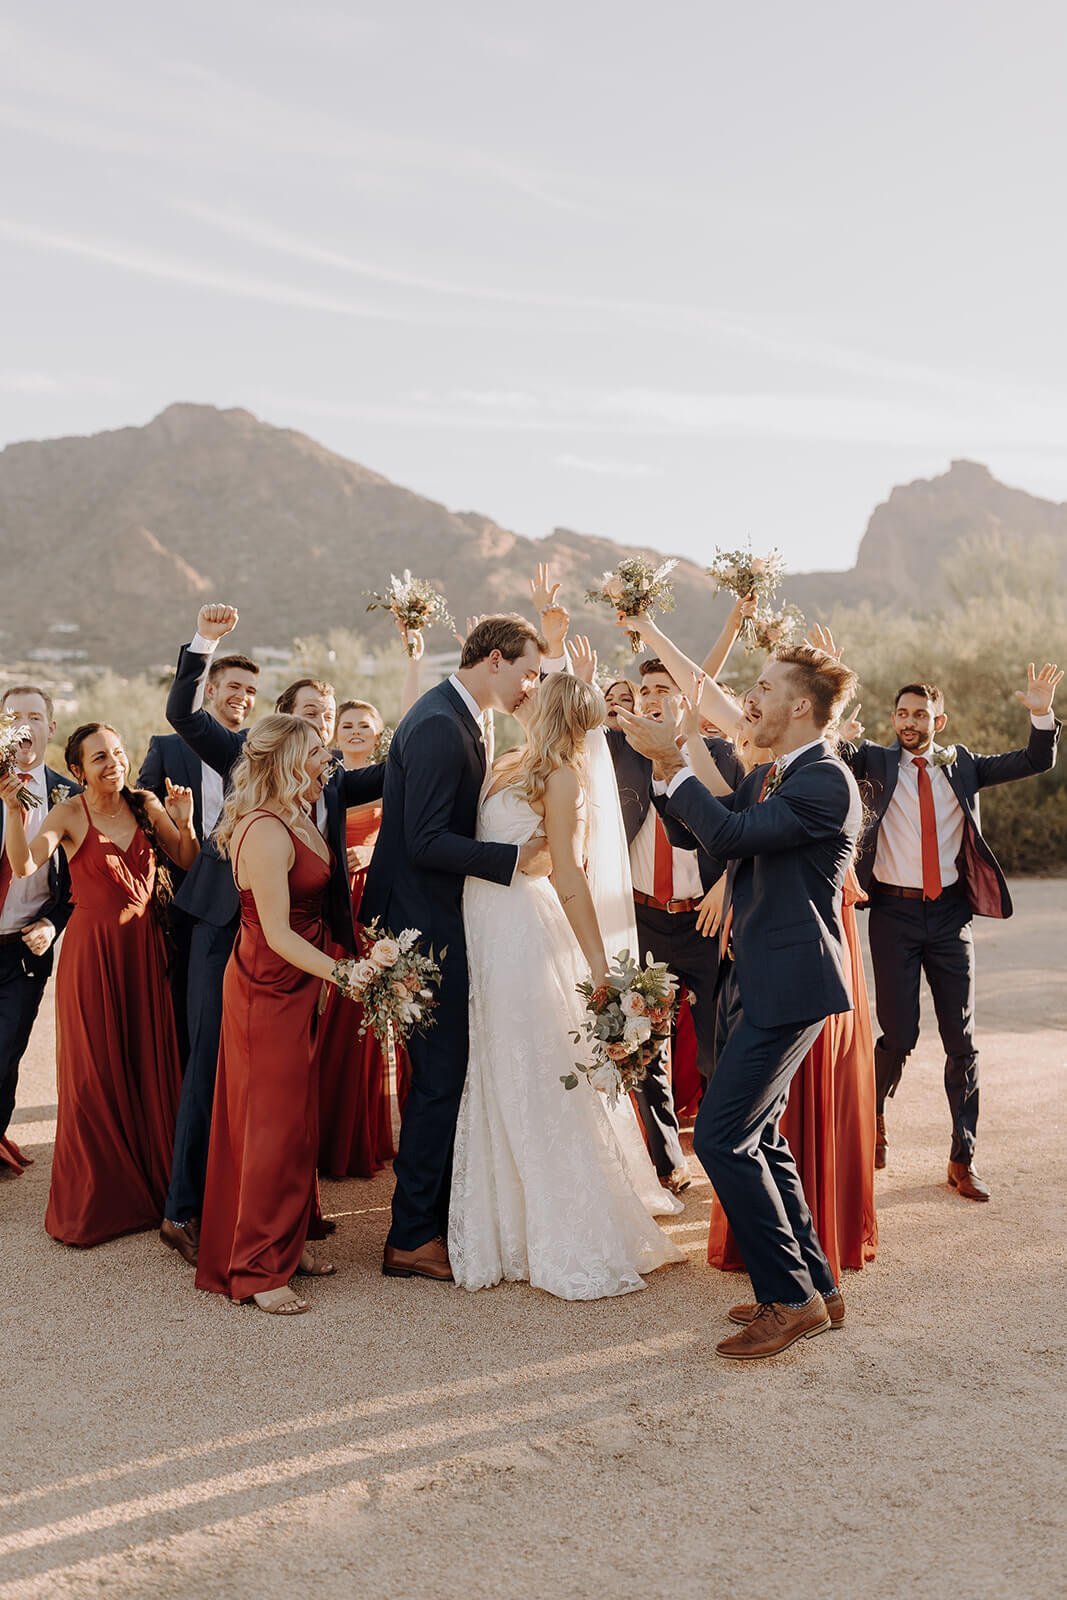 Bride and groom kissing with bridesmaids and groomsmen celebrating around them, desert mountains in the background